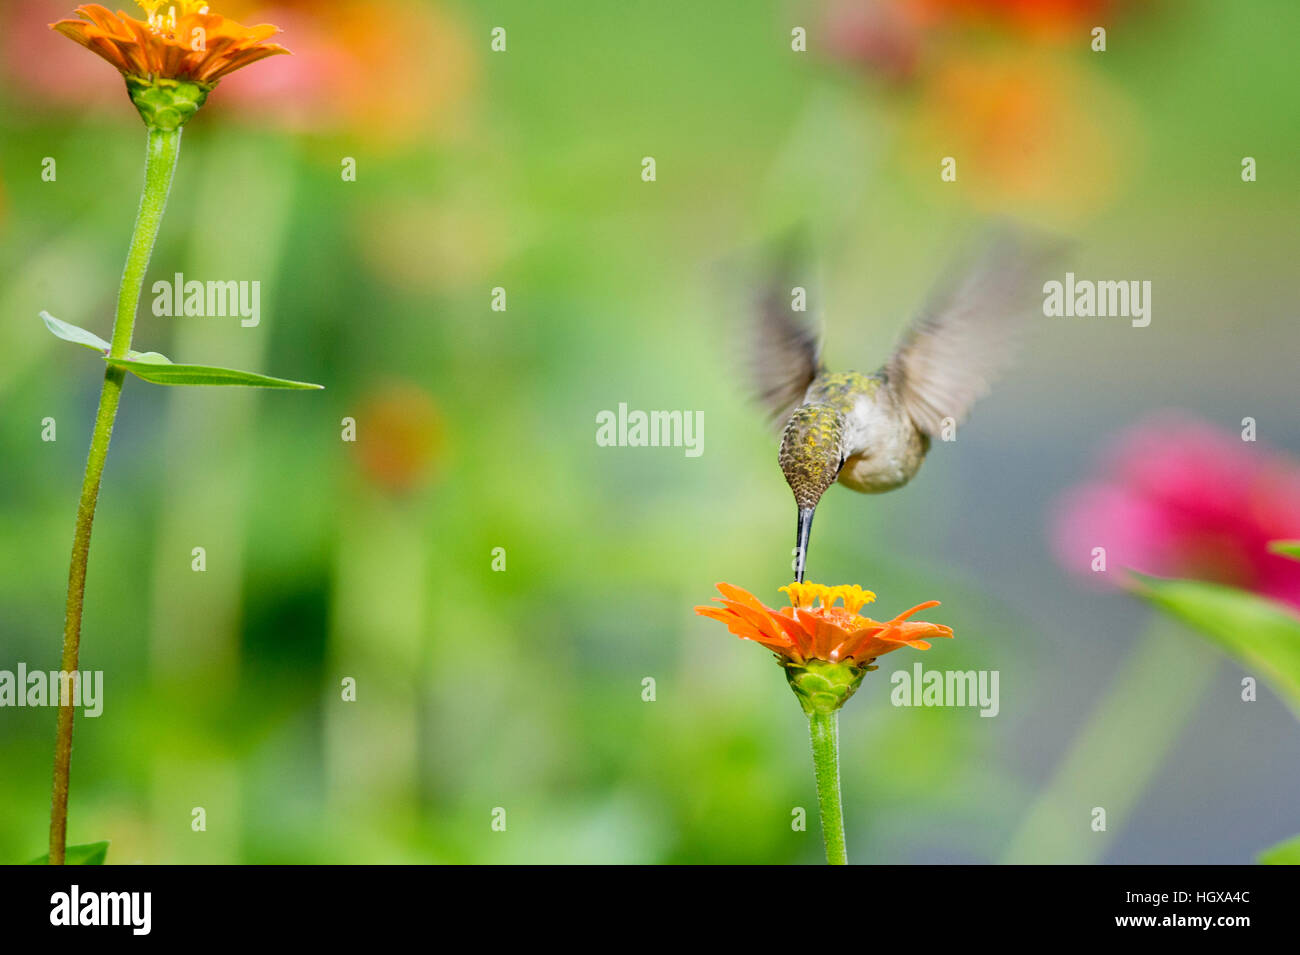 A female Ruby-throated Hummingbird feeds on a Zinnia flower in a garden of flowers. Stock Photo